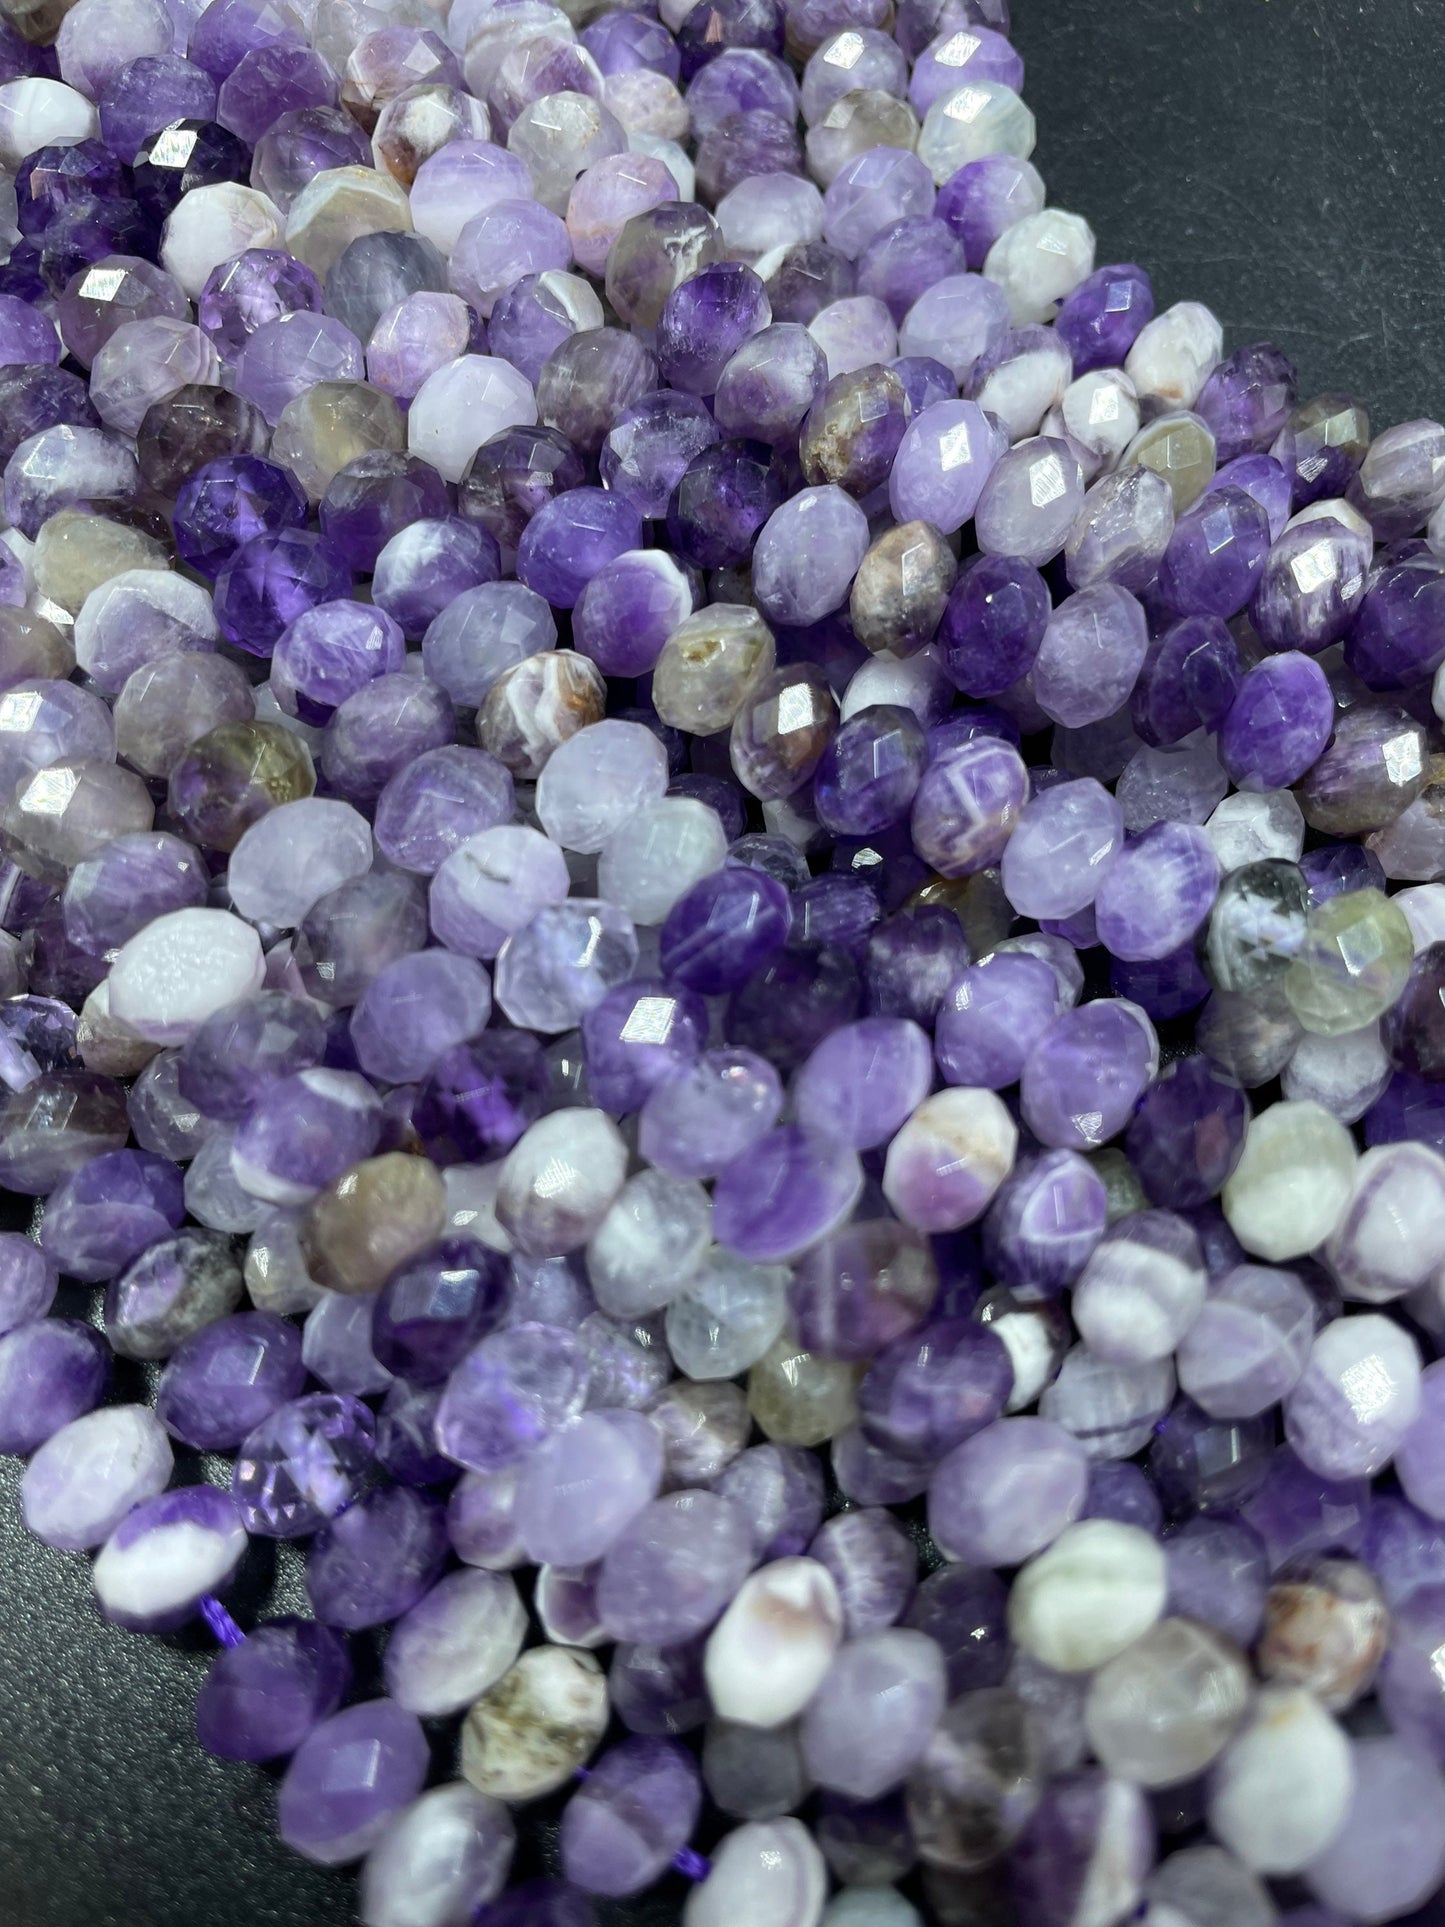 AAA Natural Flower Amethyst Gemstone Bead Faceted 8x5mm 9x6mm Rondelle Shape, Beautiful Natural Purple Amethyst Gemstone Bead